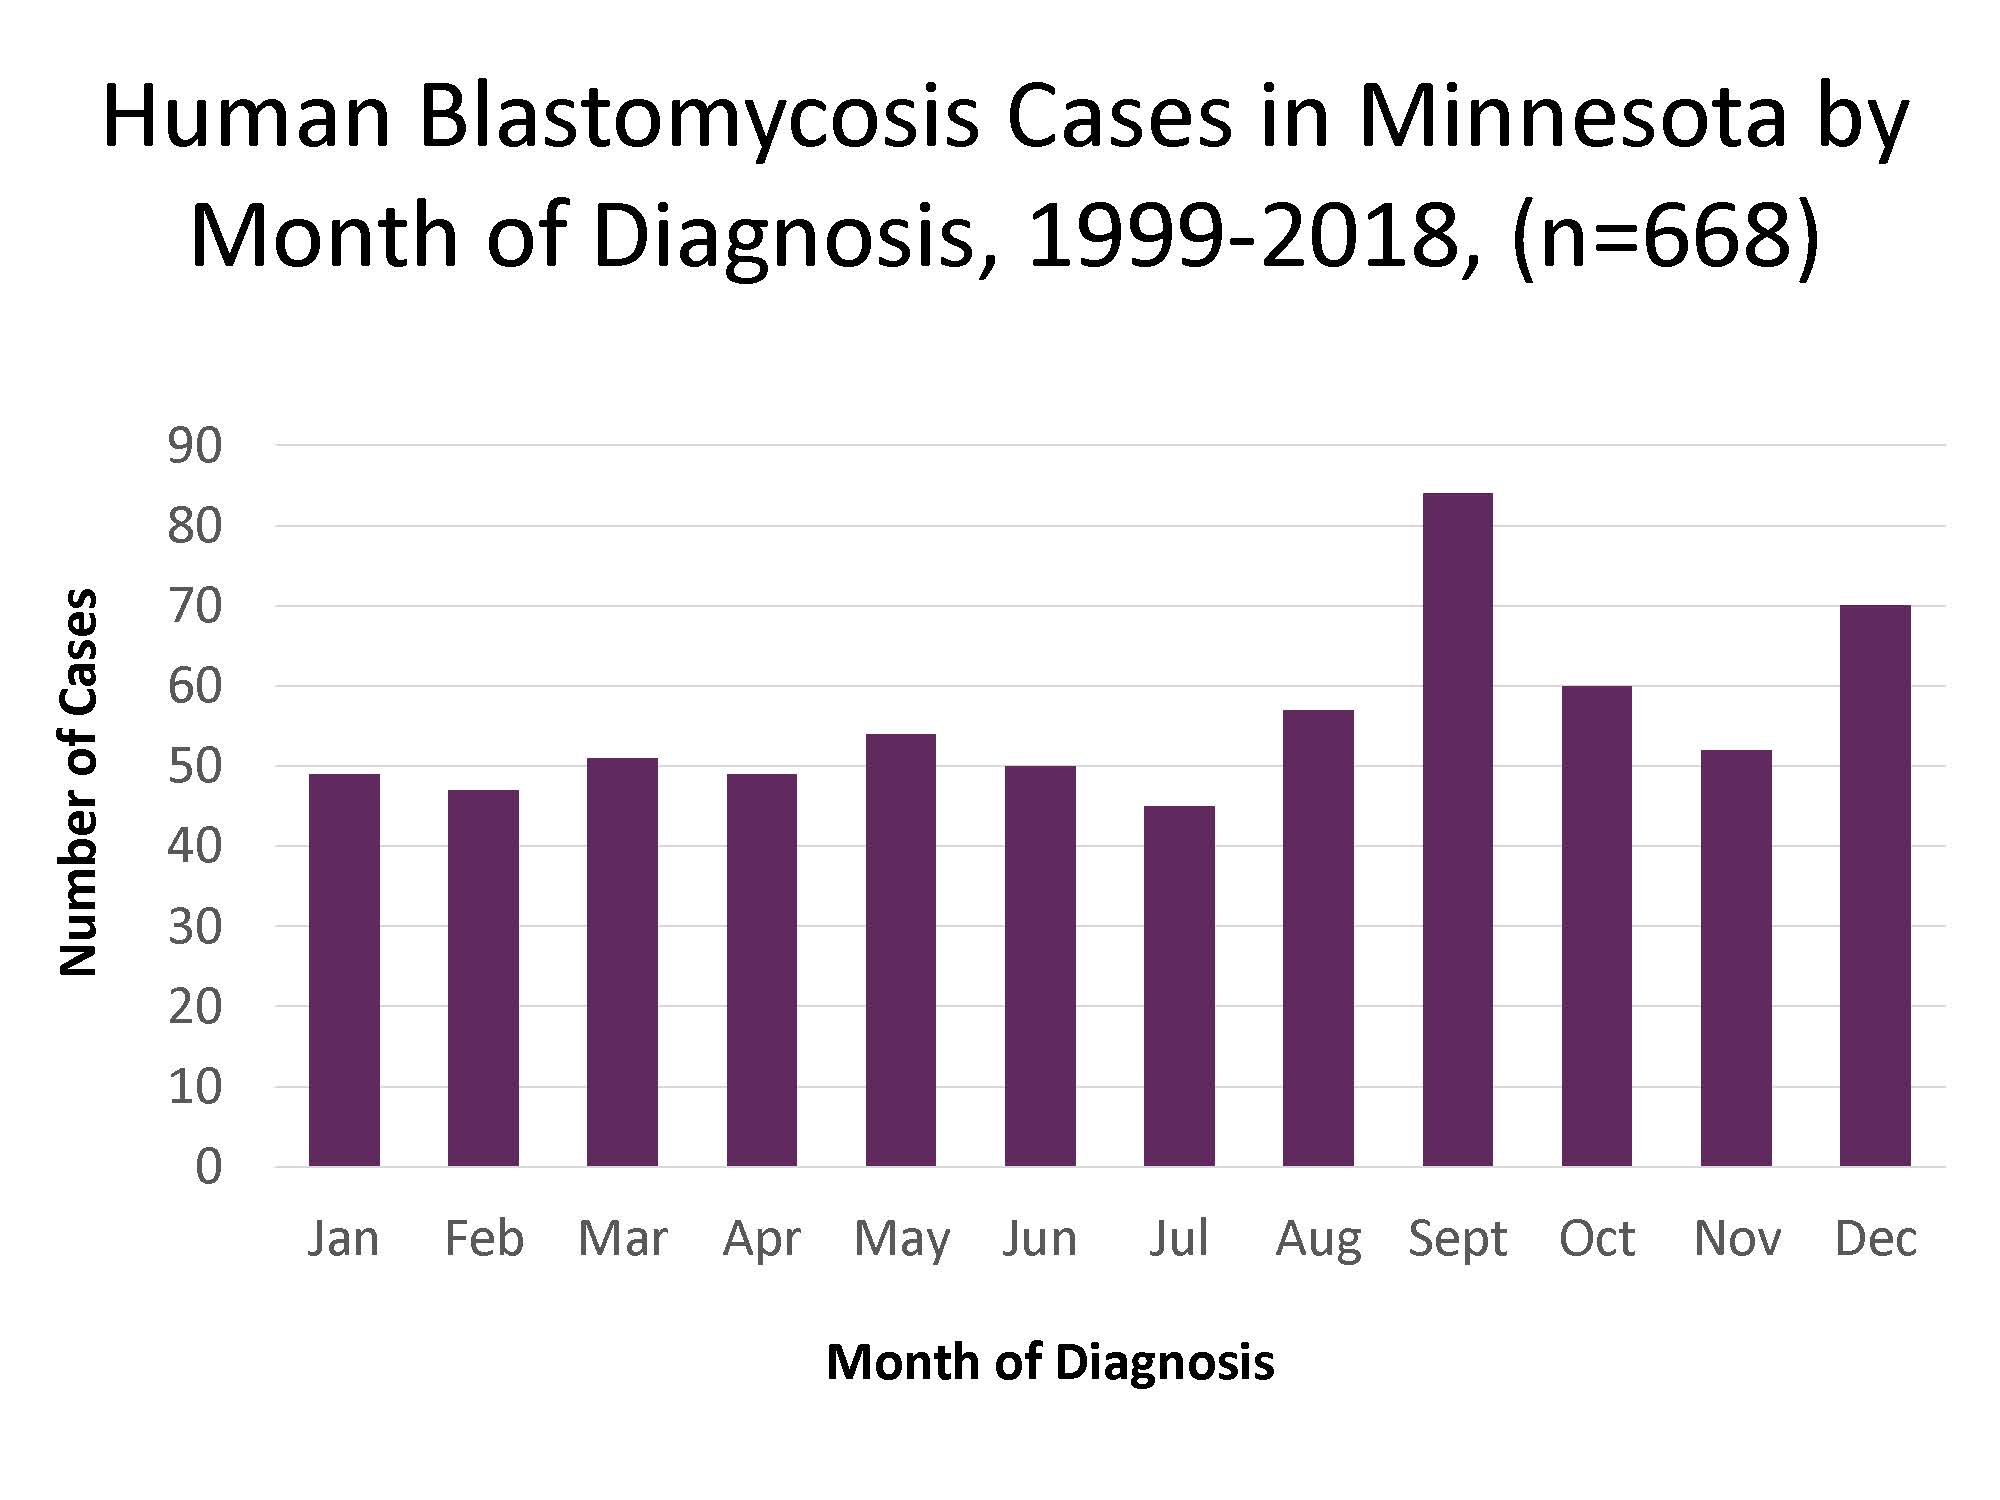 Human blastomycosis cases in Minnesota by month of diagnosis
      